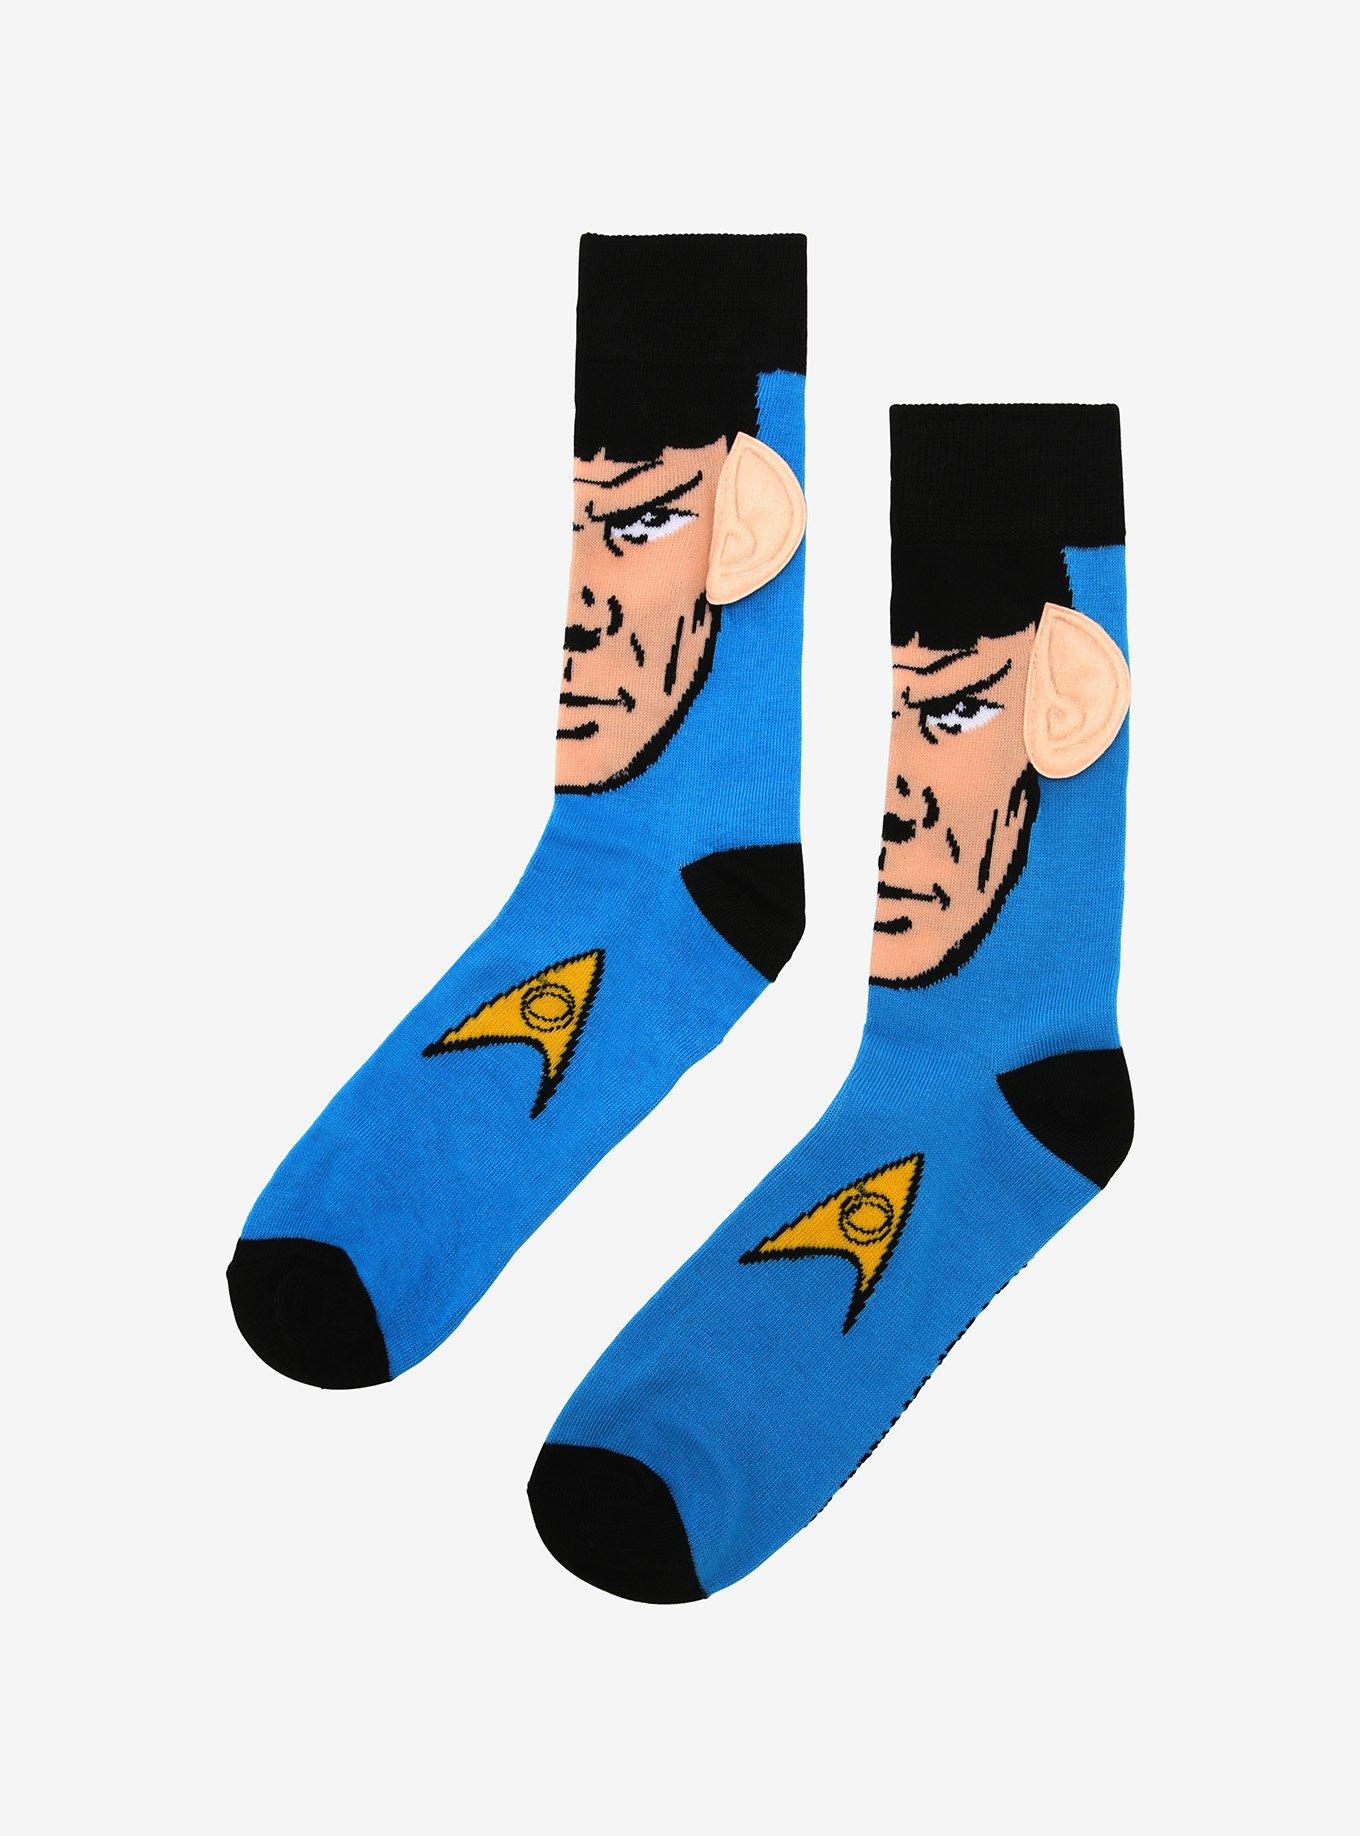 STAR TREK Live Long and Prosper Scarf Gifts for Men and Women - Spock Scarf  Merchandise